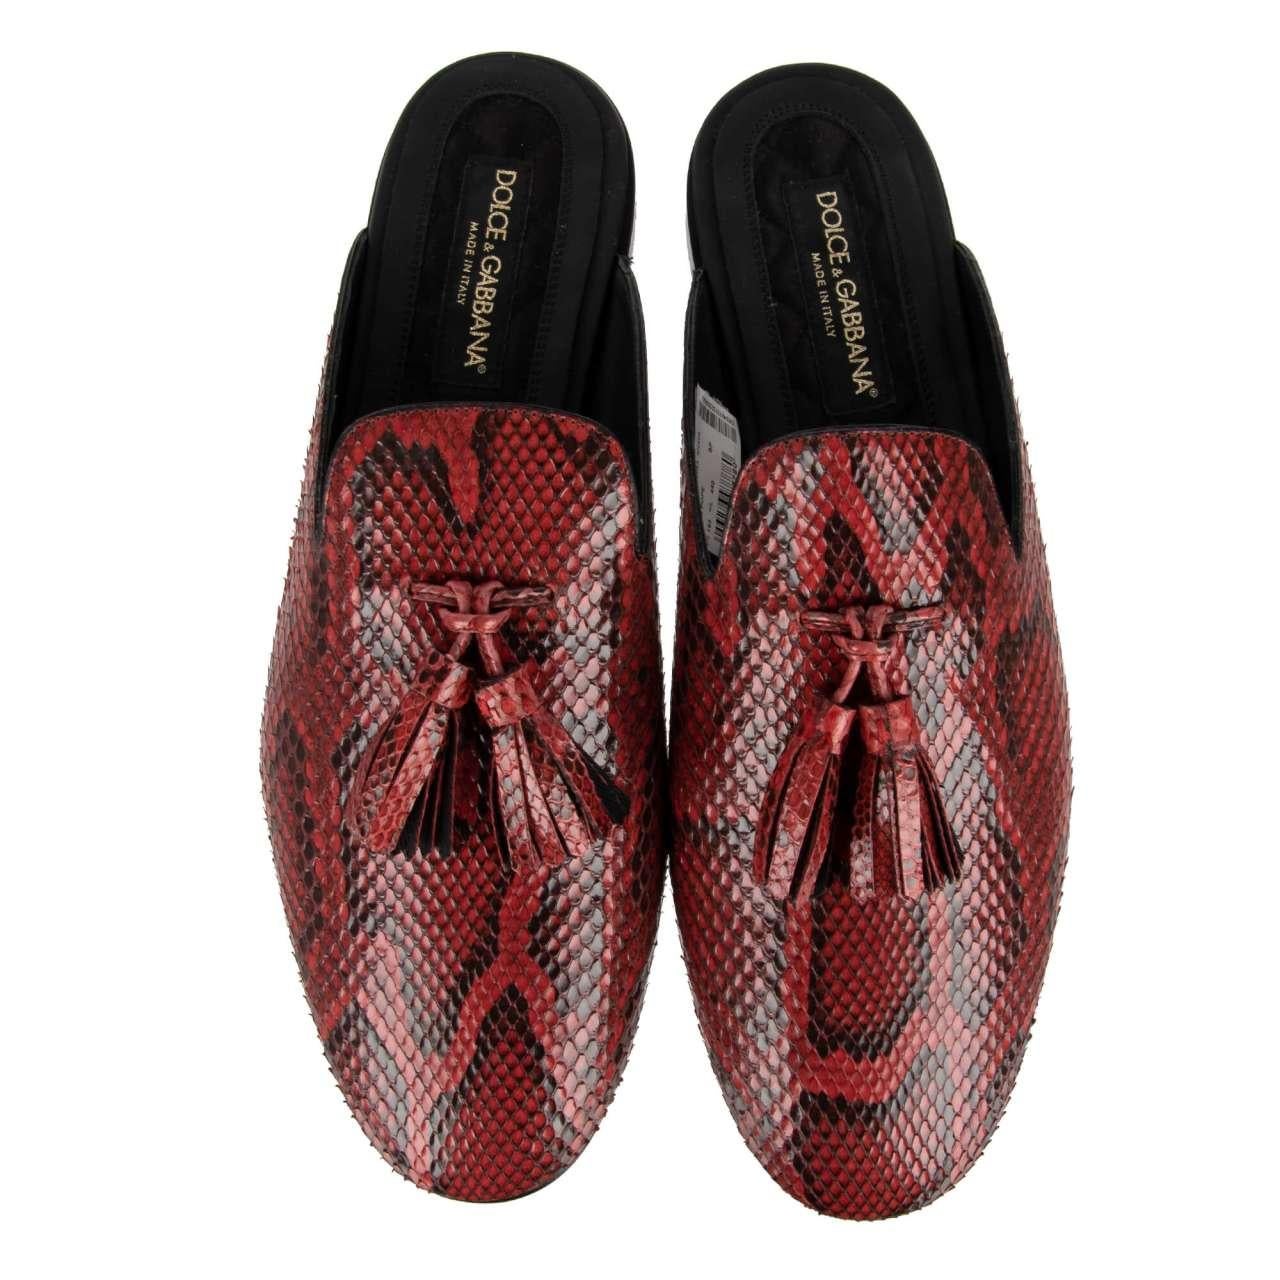 D&G Snake Leather Tassels Shoes Slipper YOUNG POPE Red 44 UK 10 US 11 For Sale 2